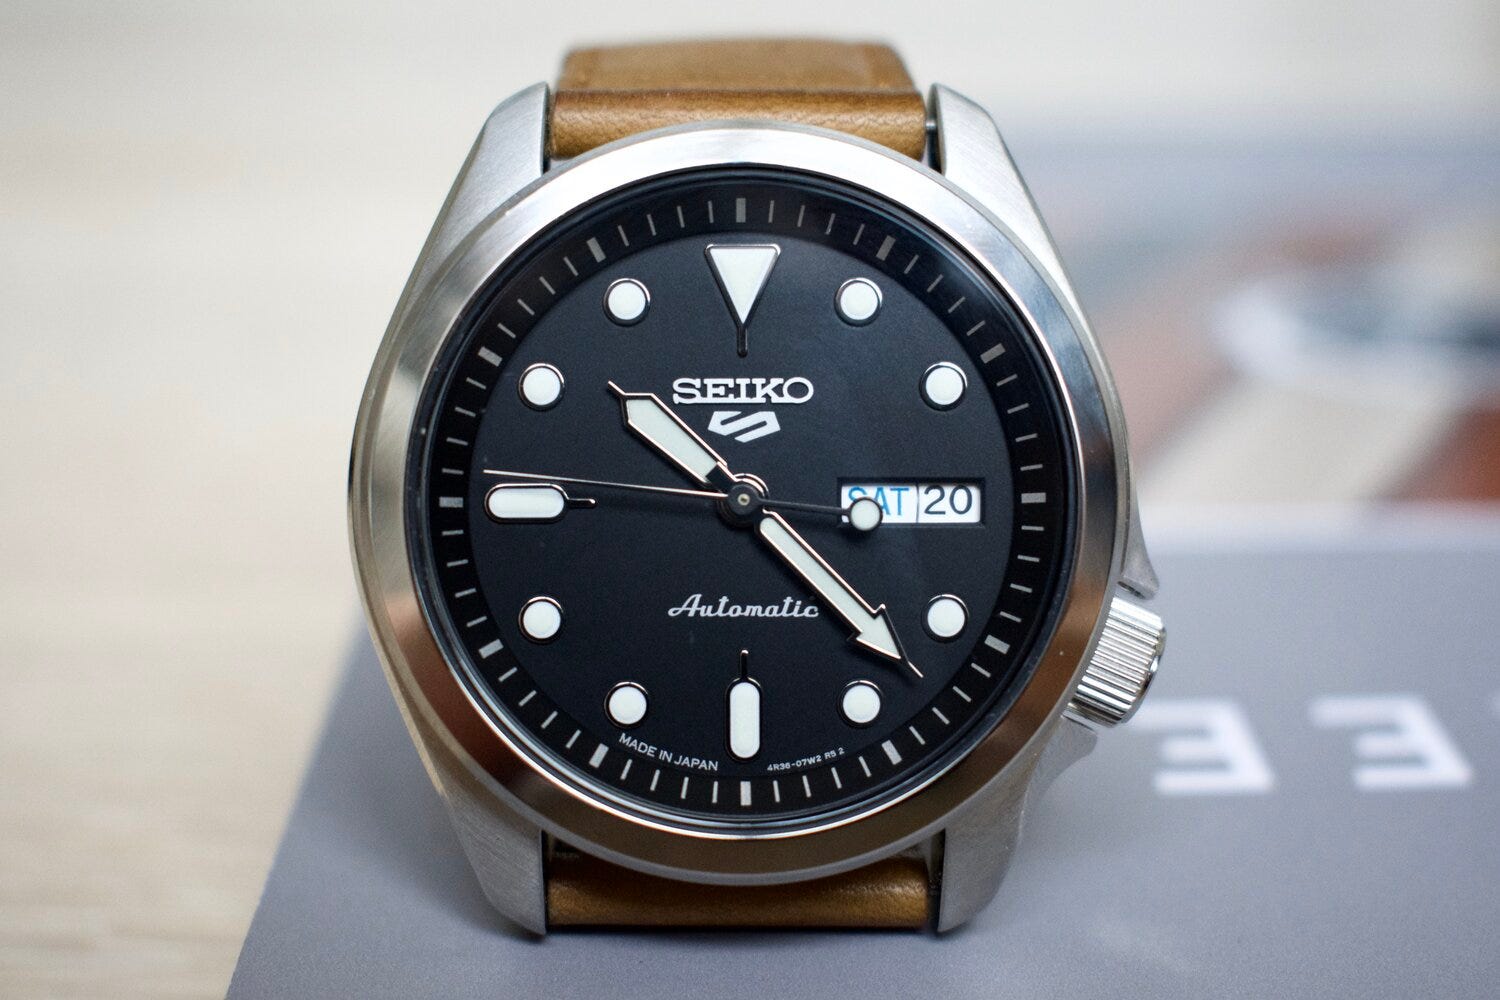 Seiko 5 Sports: The most important watch of 2020